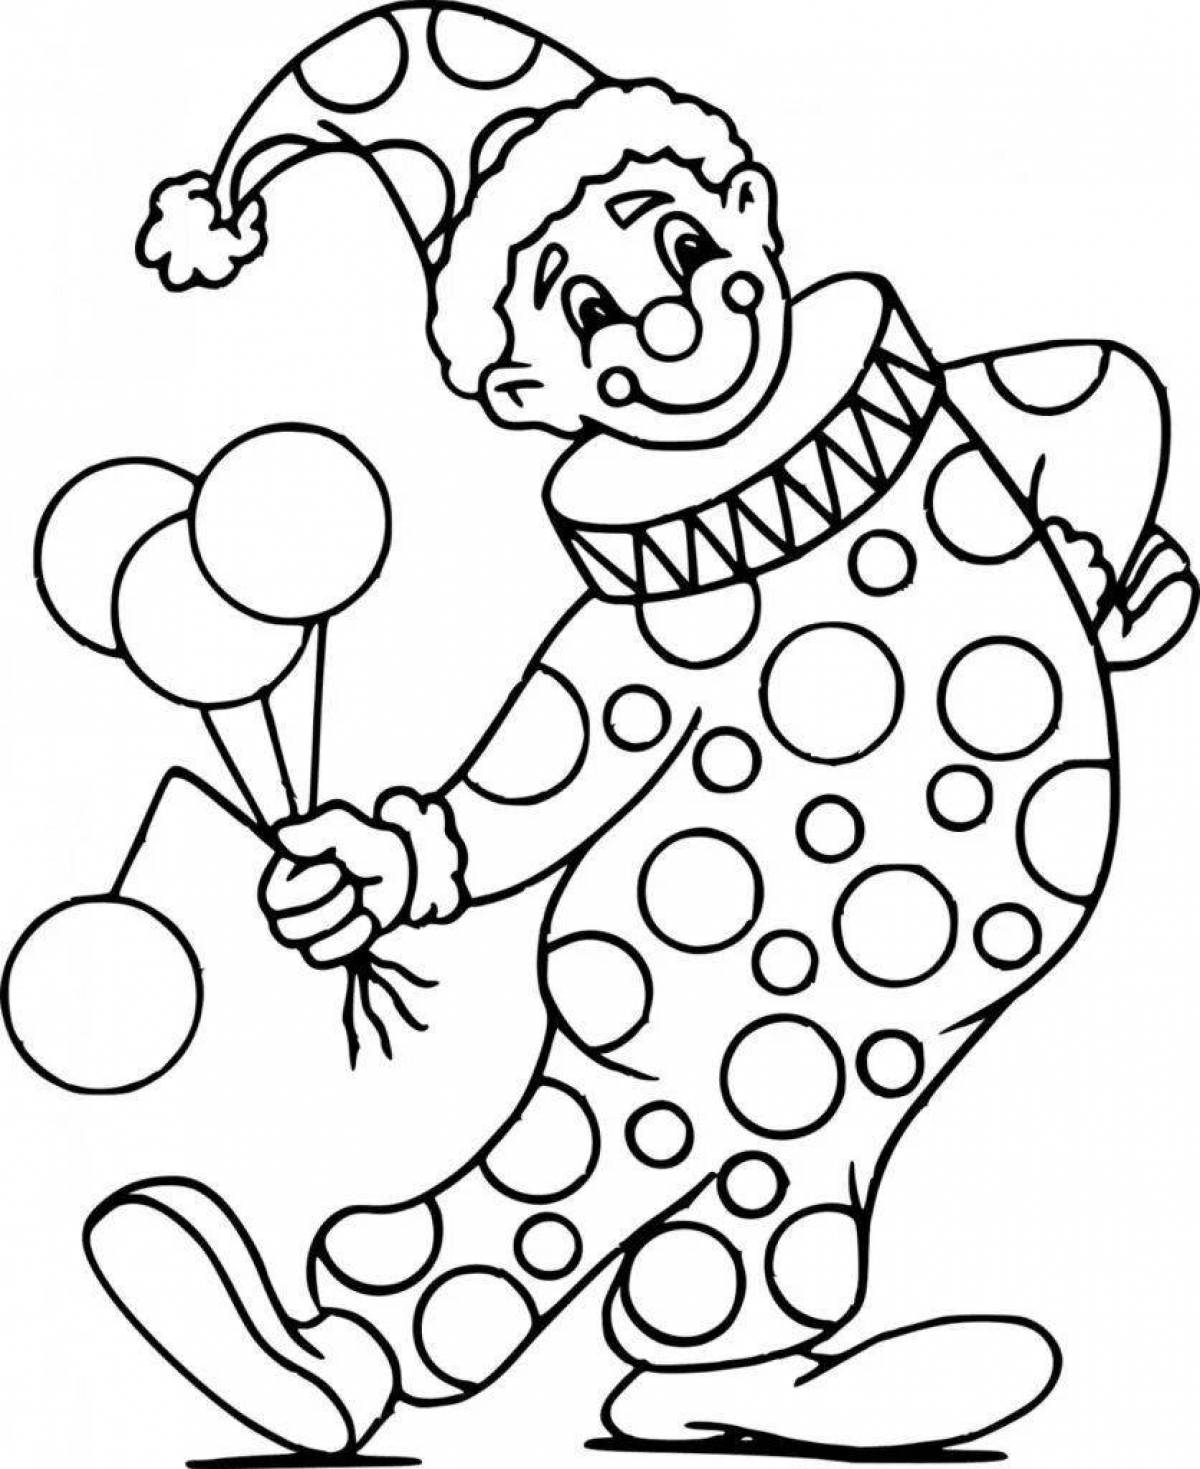 Glowing parsley coloring page